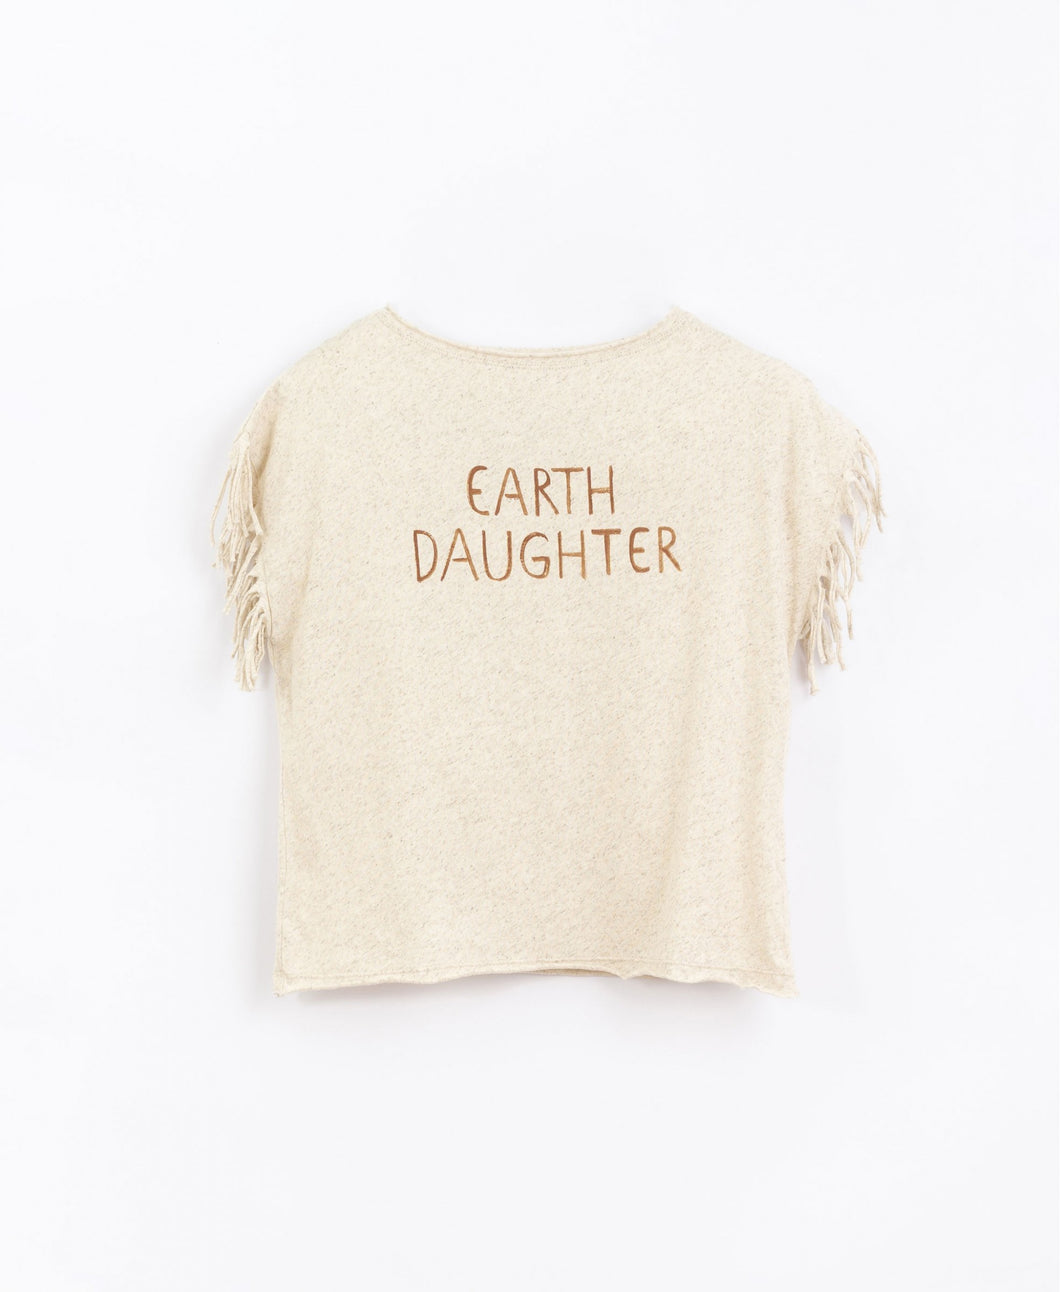 Earth Daughter Fringed Tee